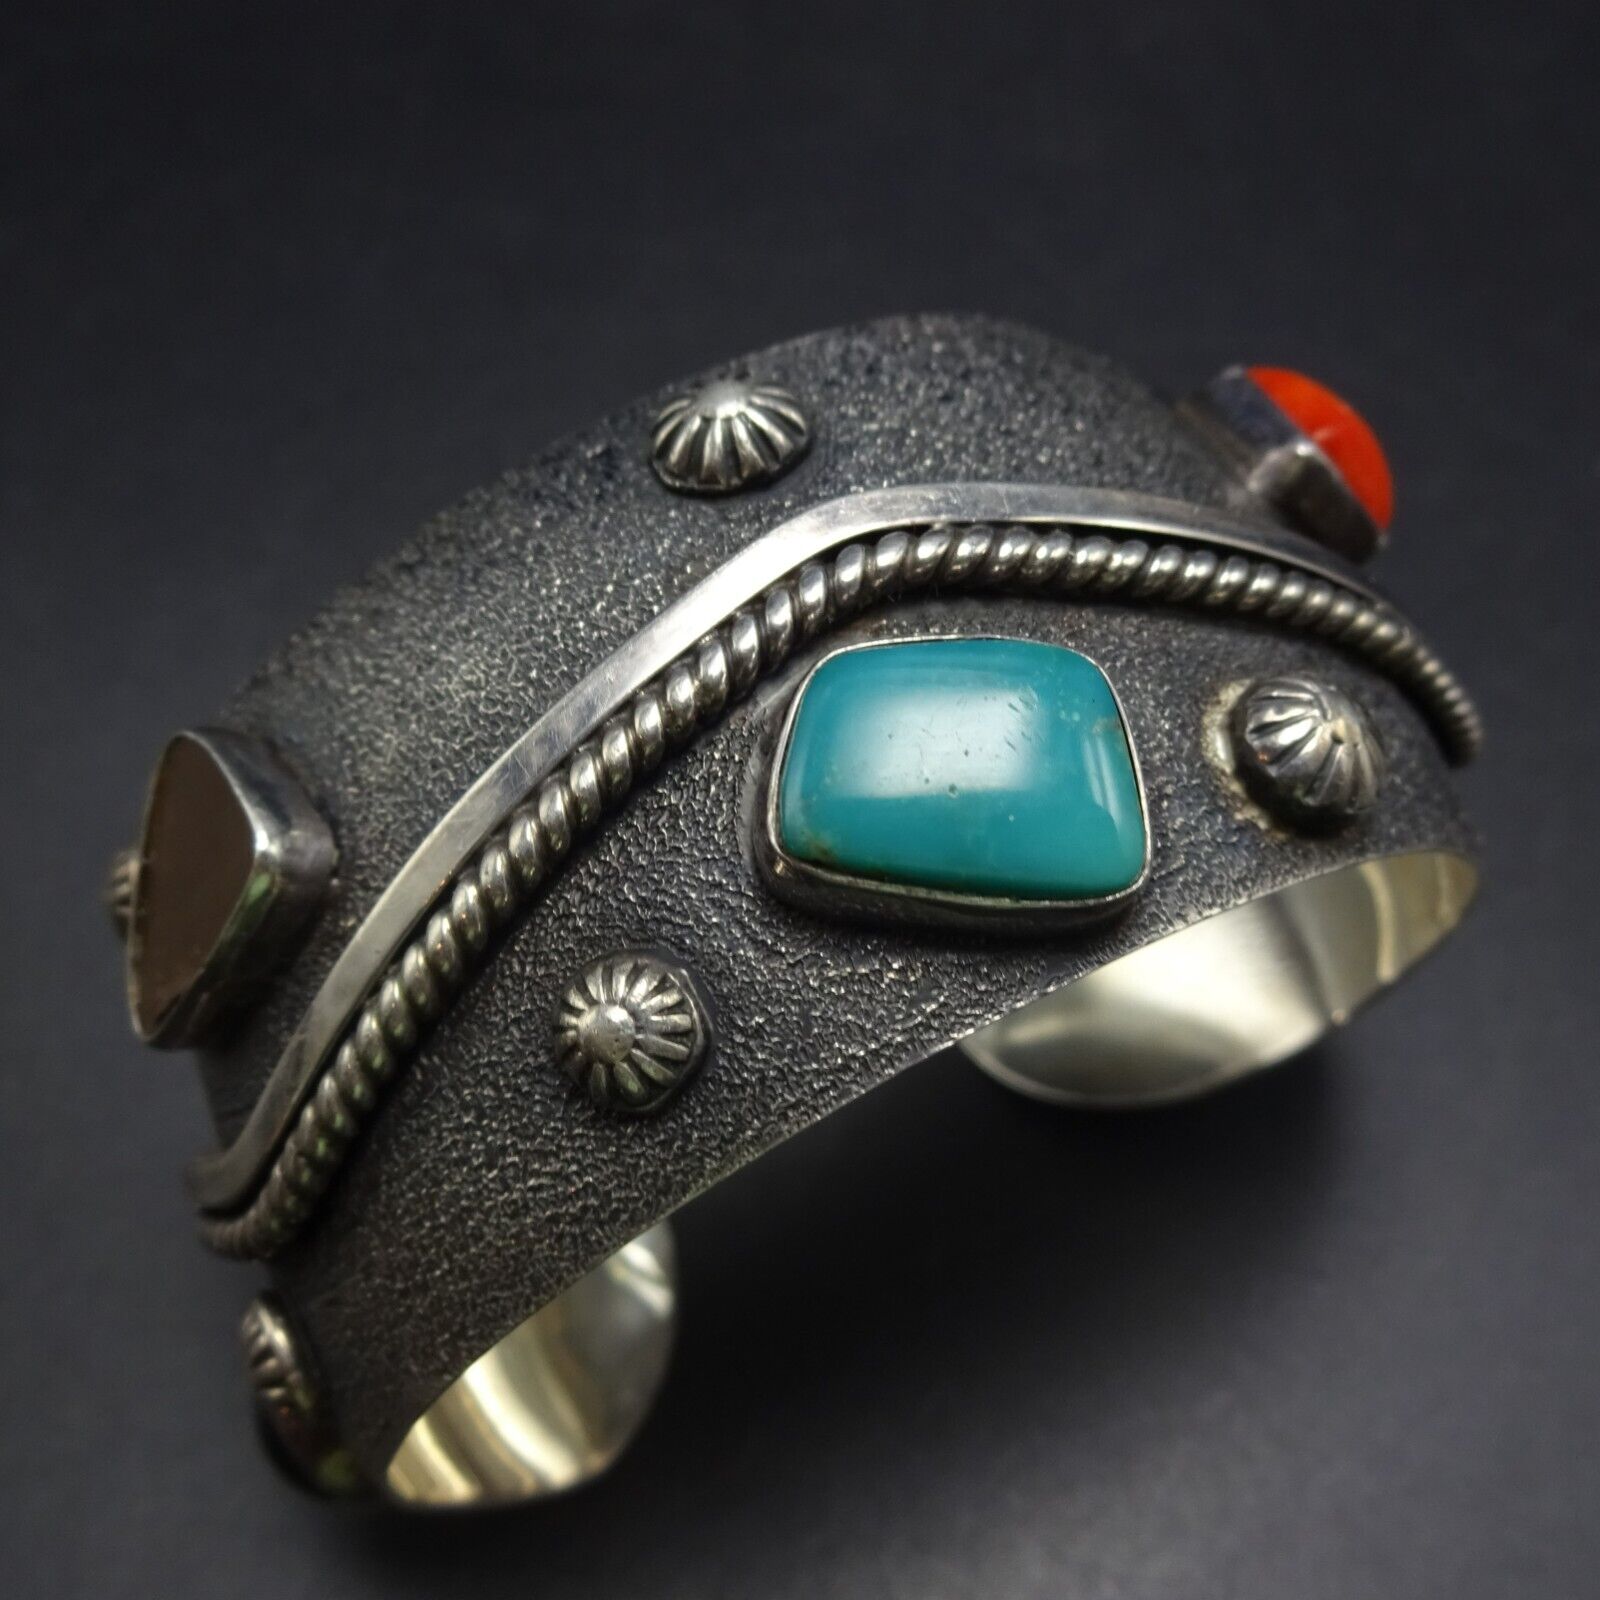 NAKAI Navajo VINTAGE Sterling Silver MULTI STONE Cuff BRACELET Turquoise Coral